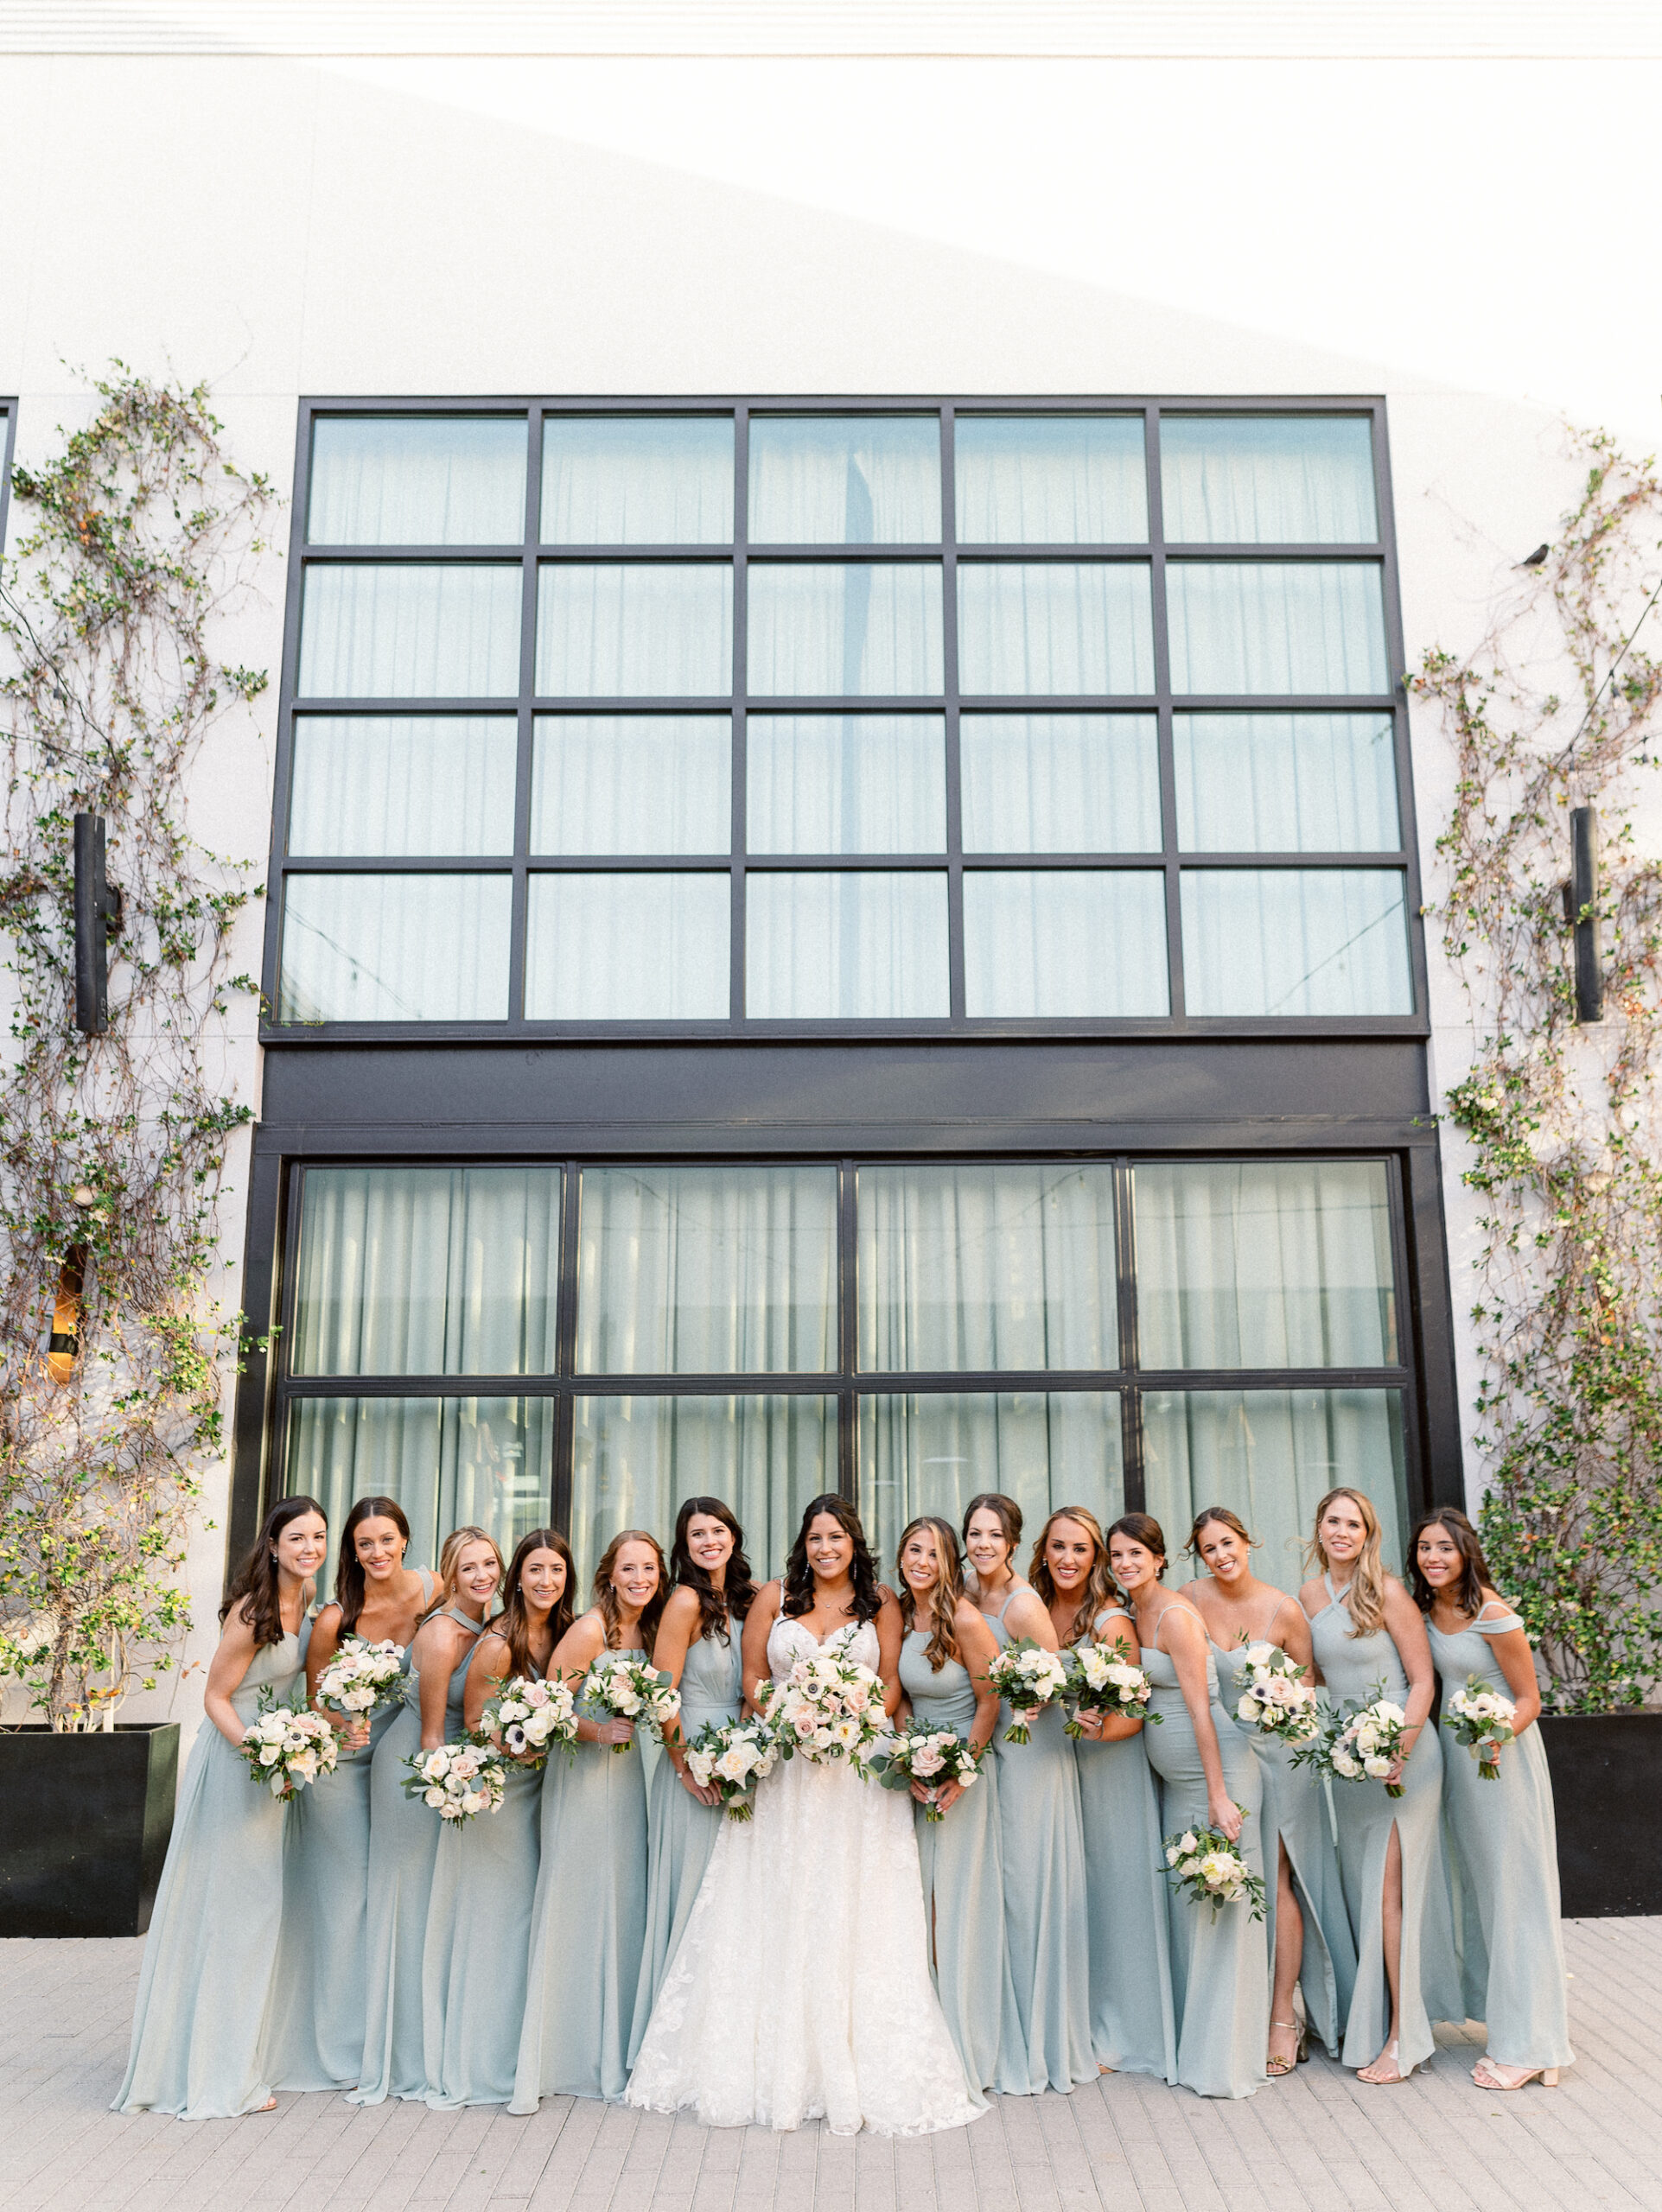 Azazie Mismatched Agave Spring Pastel Dusty Blue Bridesmaids Dresses | Tampa Bay Wedding Hair and Makeup Artist Femme Akoi Beauty Studio